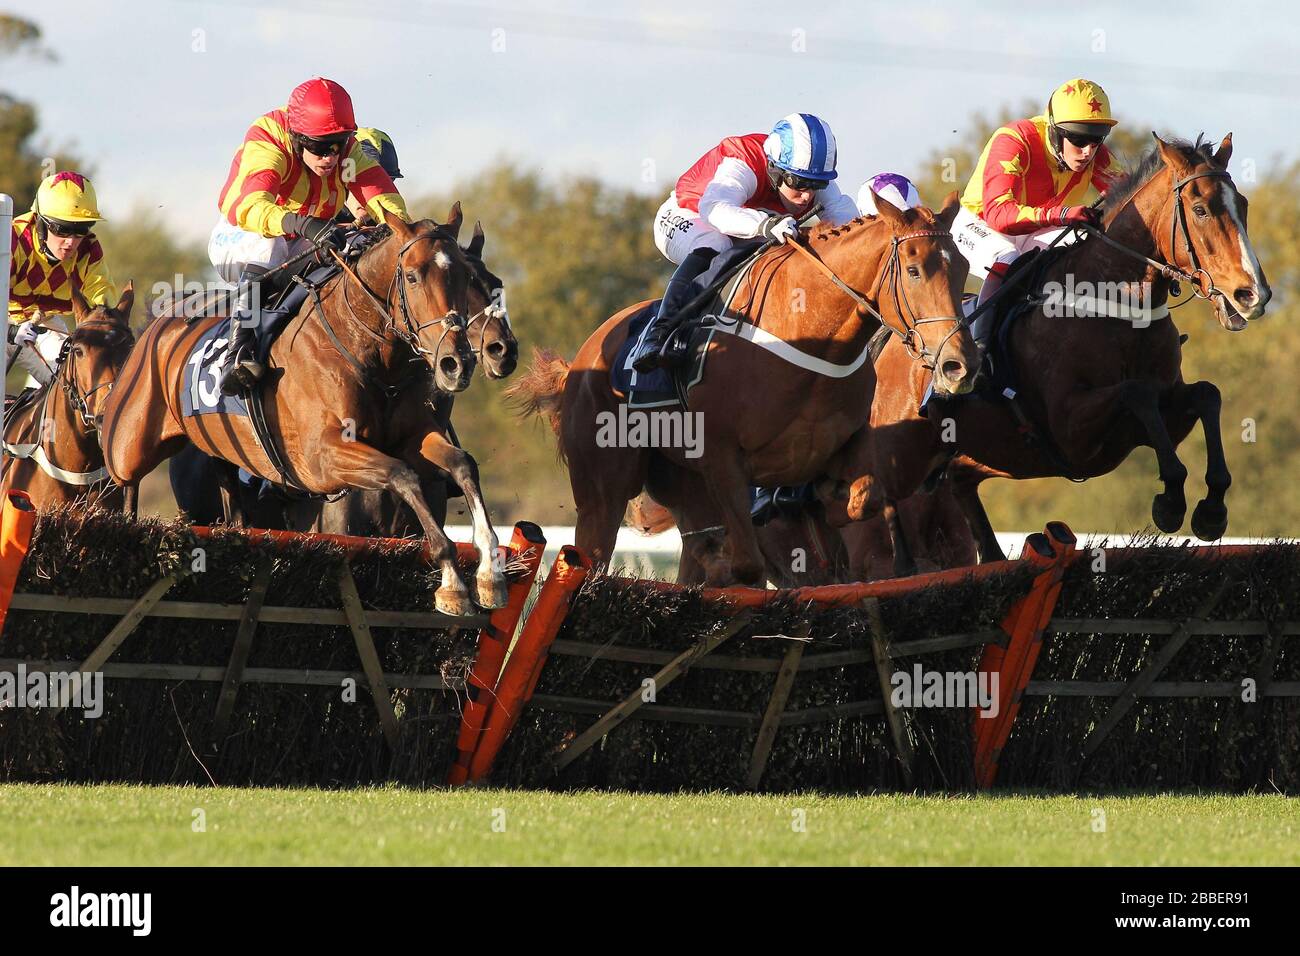 Well Mett ridden by Timmy Murphy (L), Dancing Dude ridden by Andrew Tinkler (C) and Call At Midnight ridden by Mark Marris jump during the Ingrebourne Stock Photo